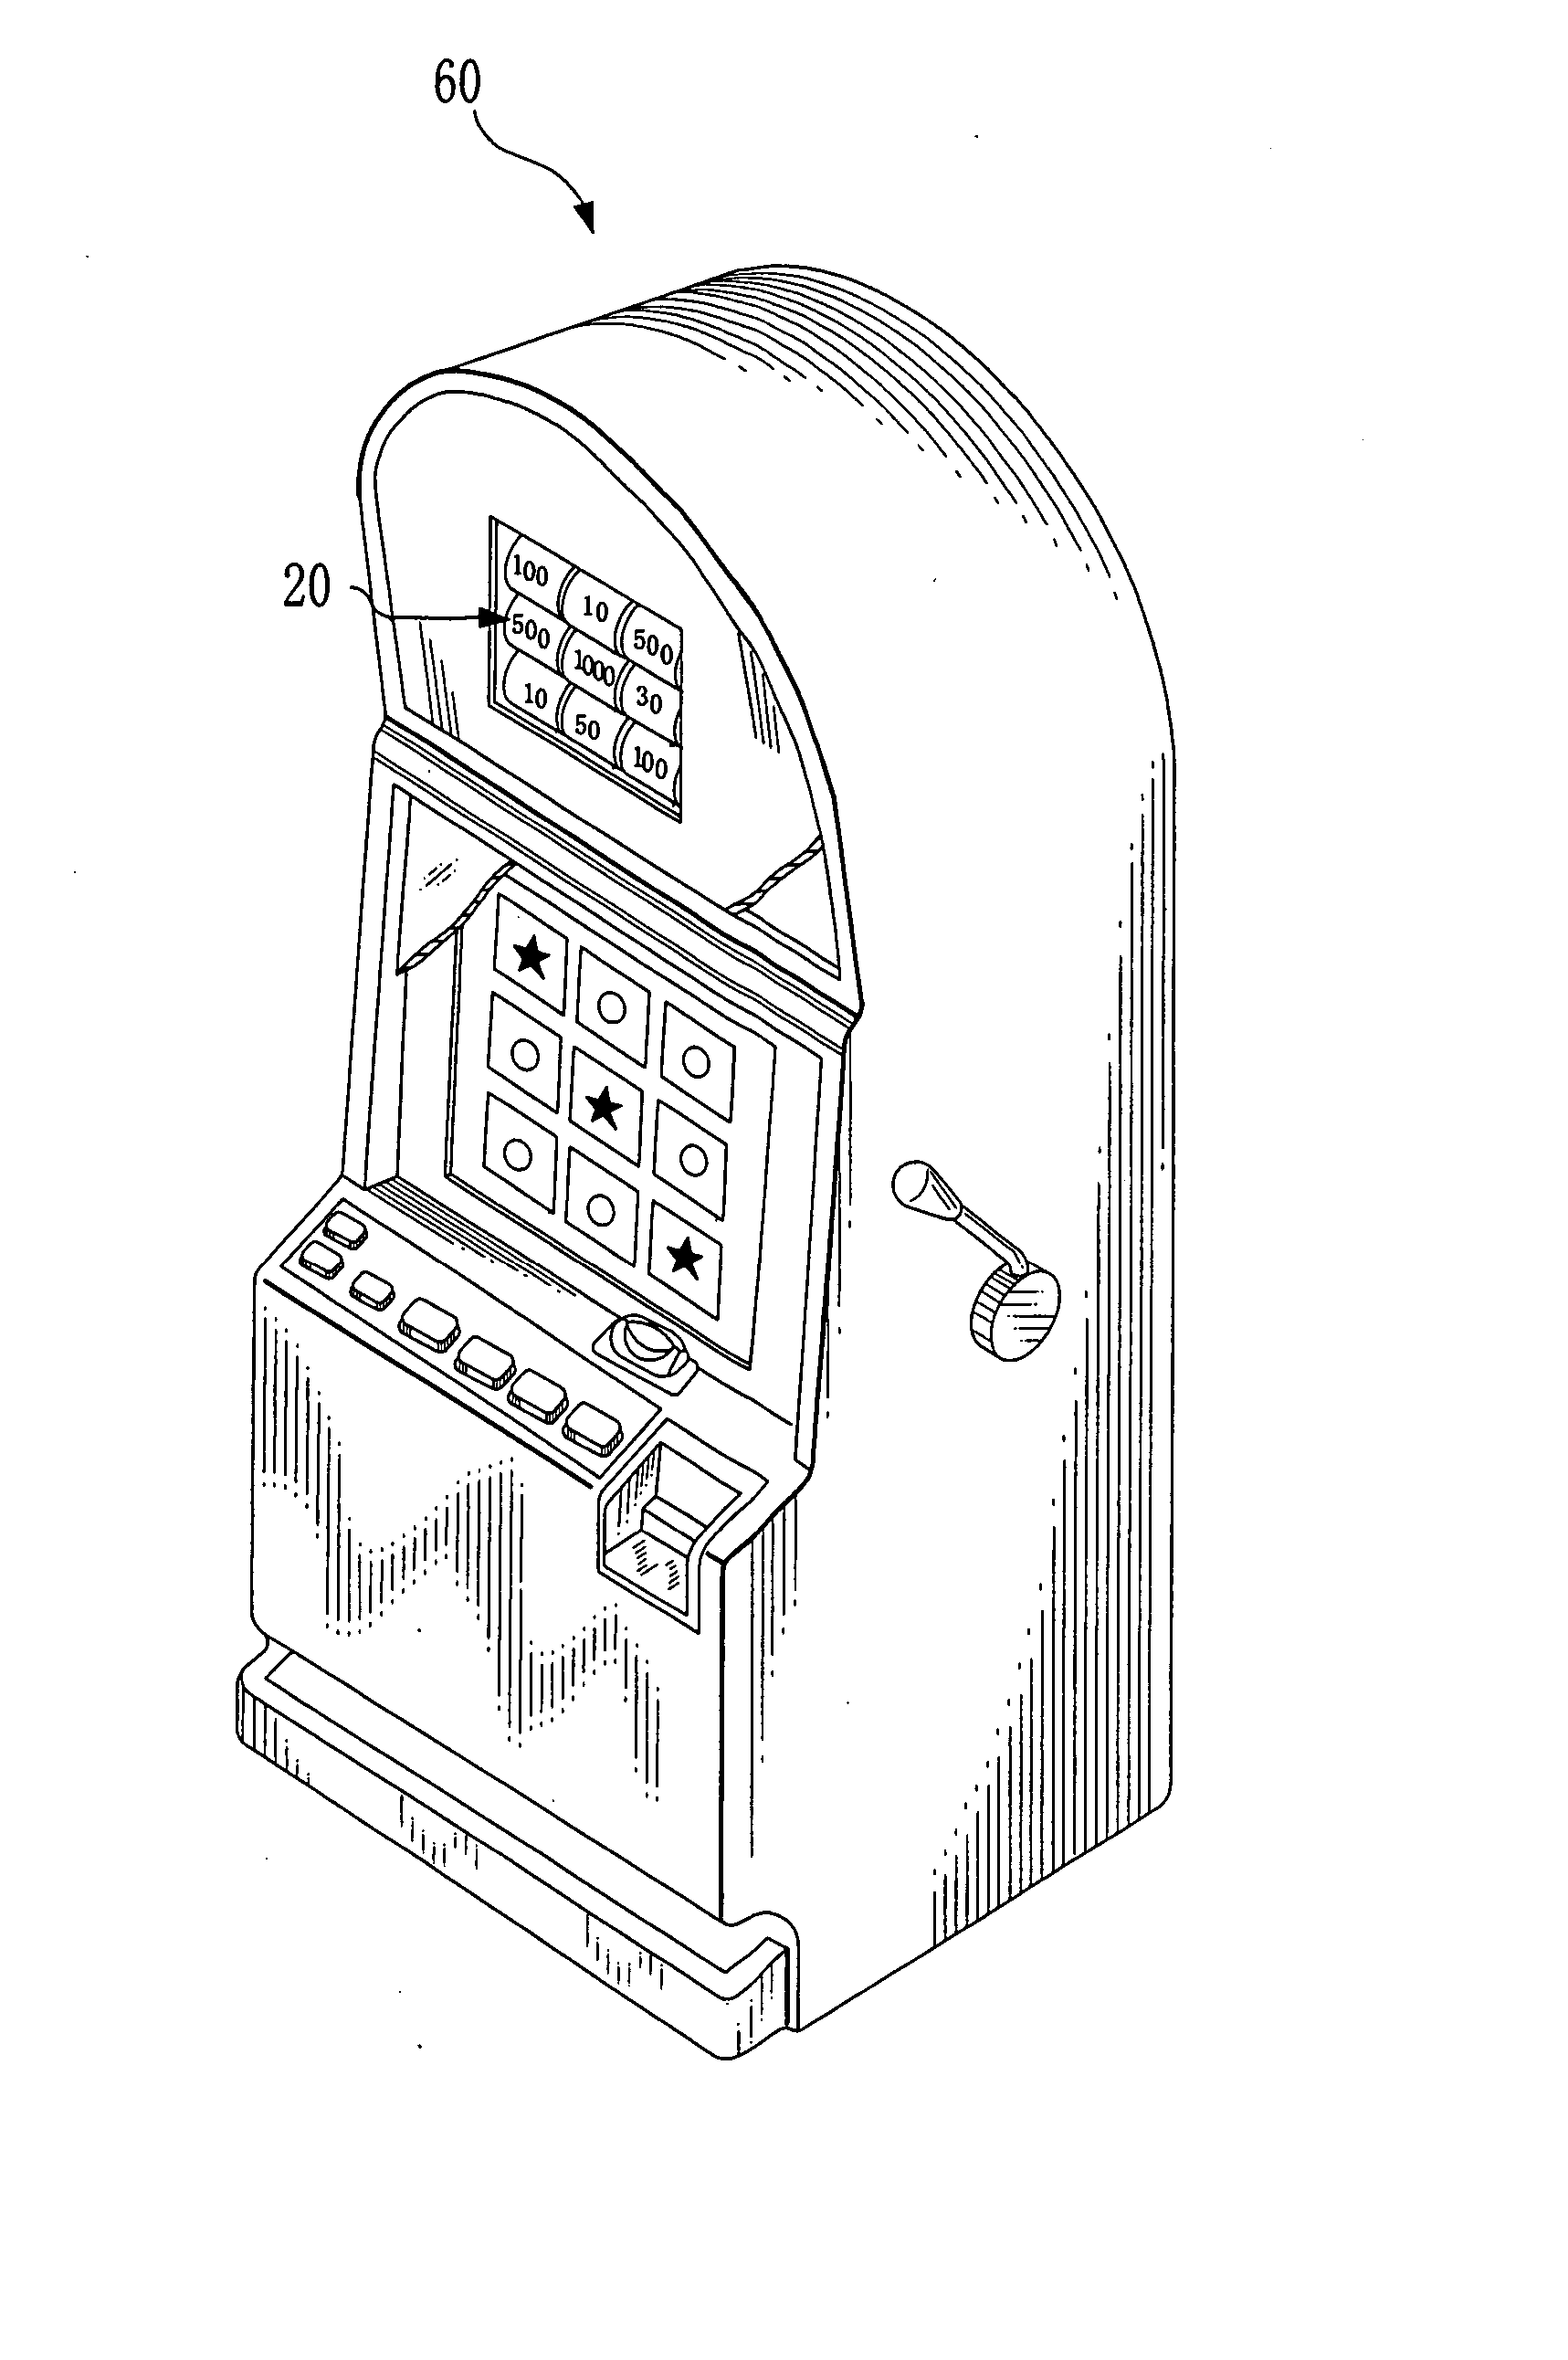 Game machine with complex display apparatus